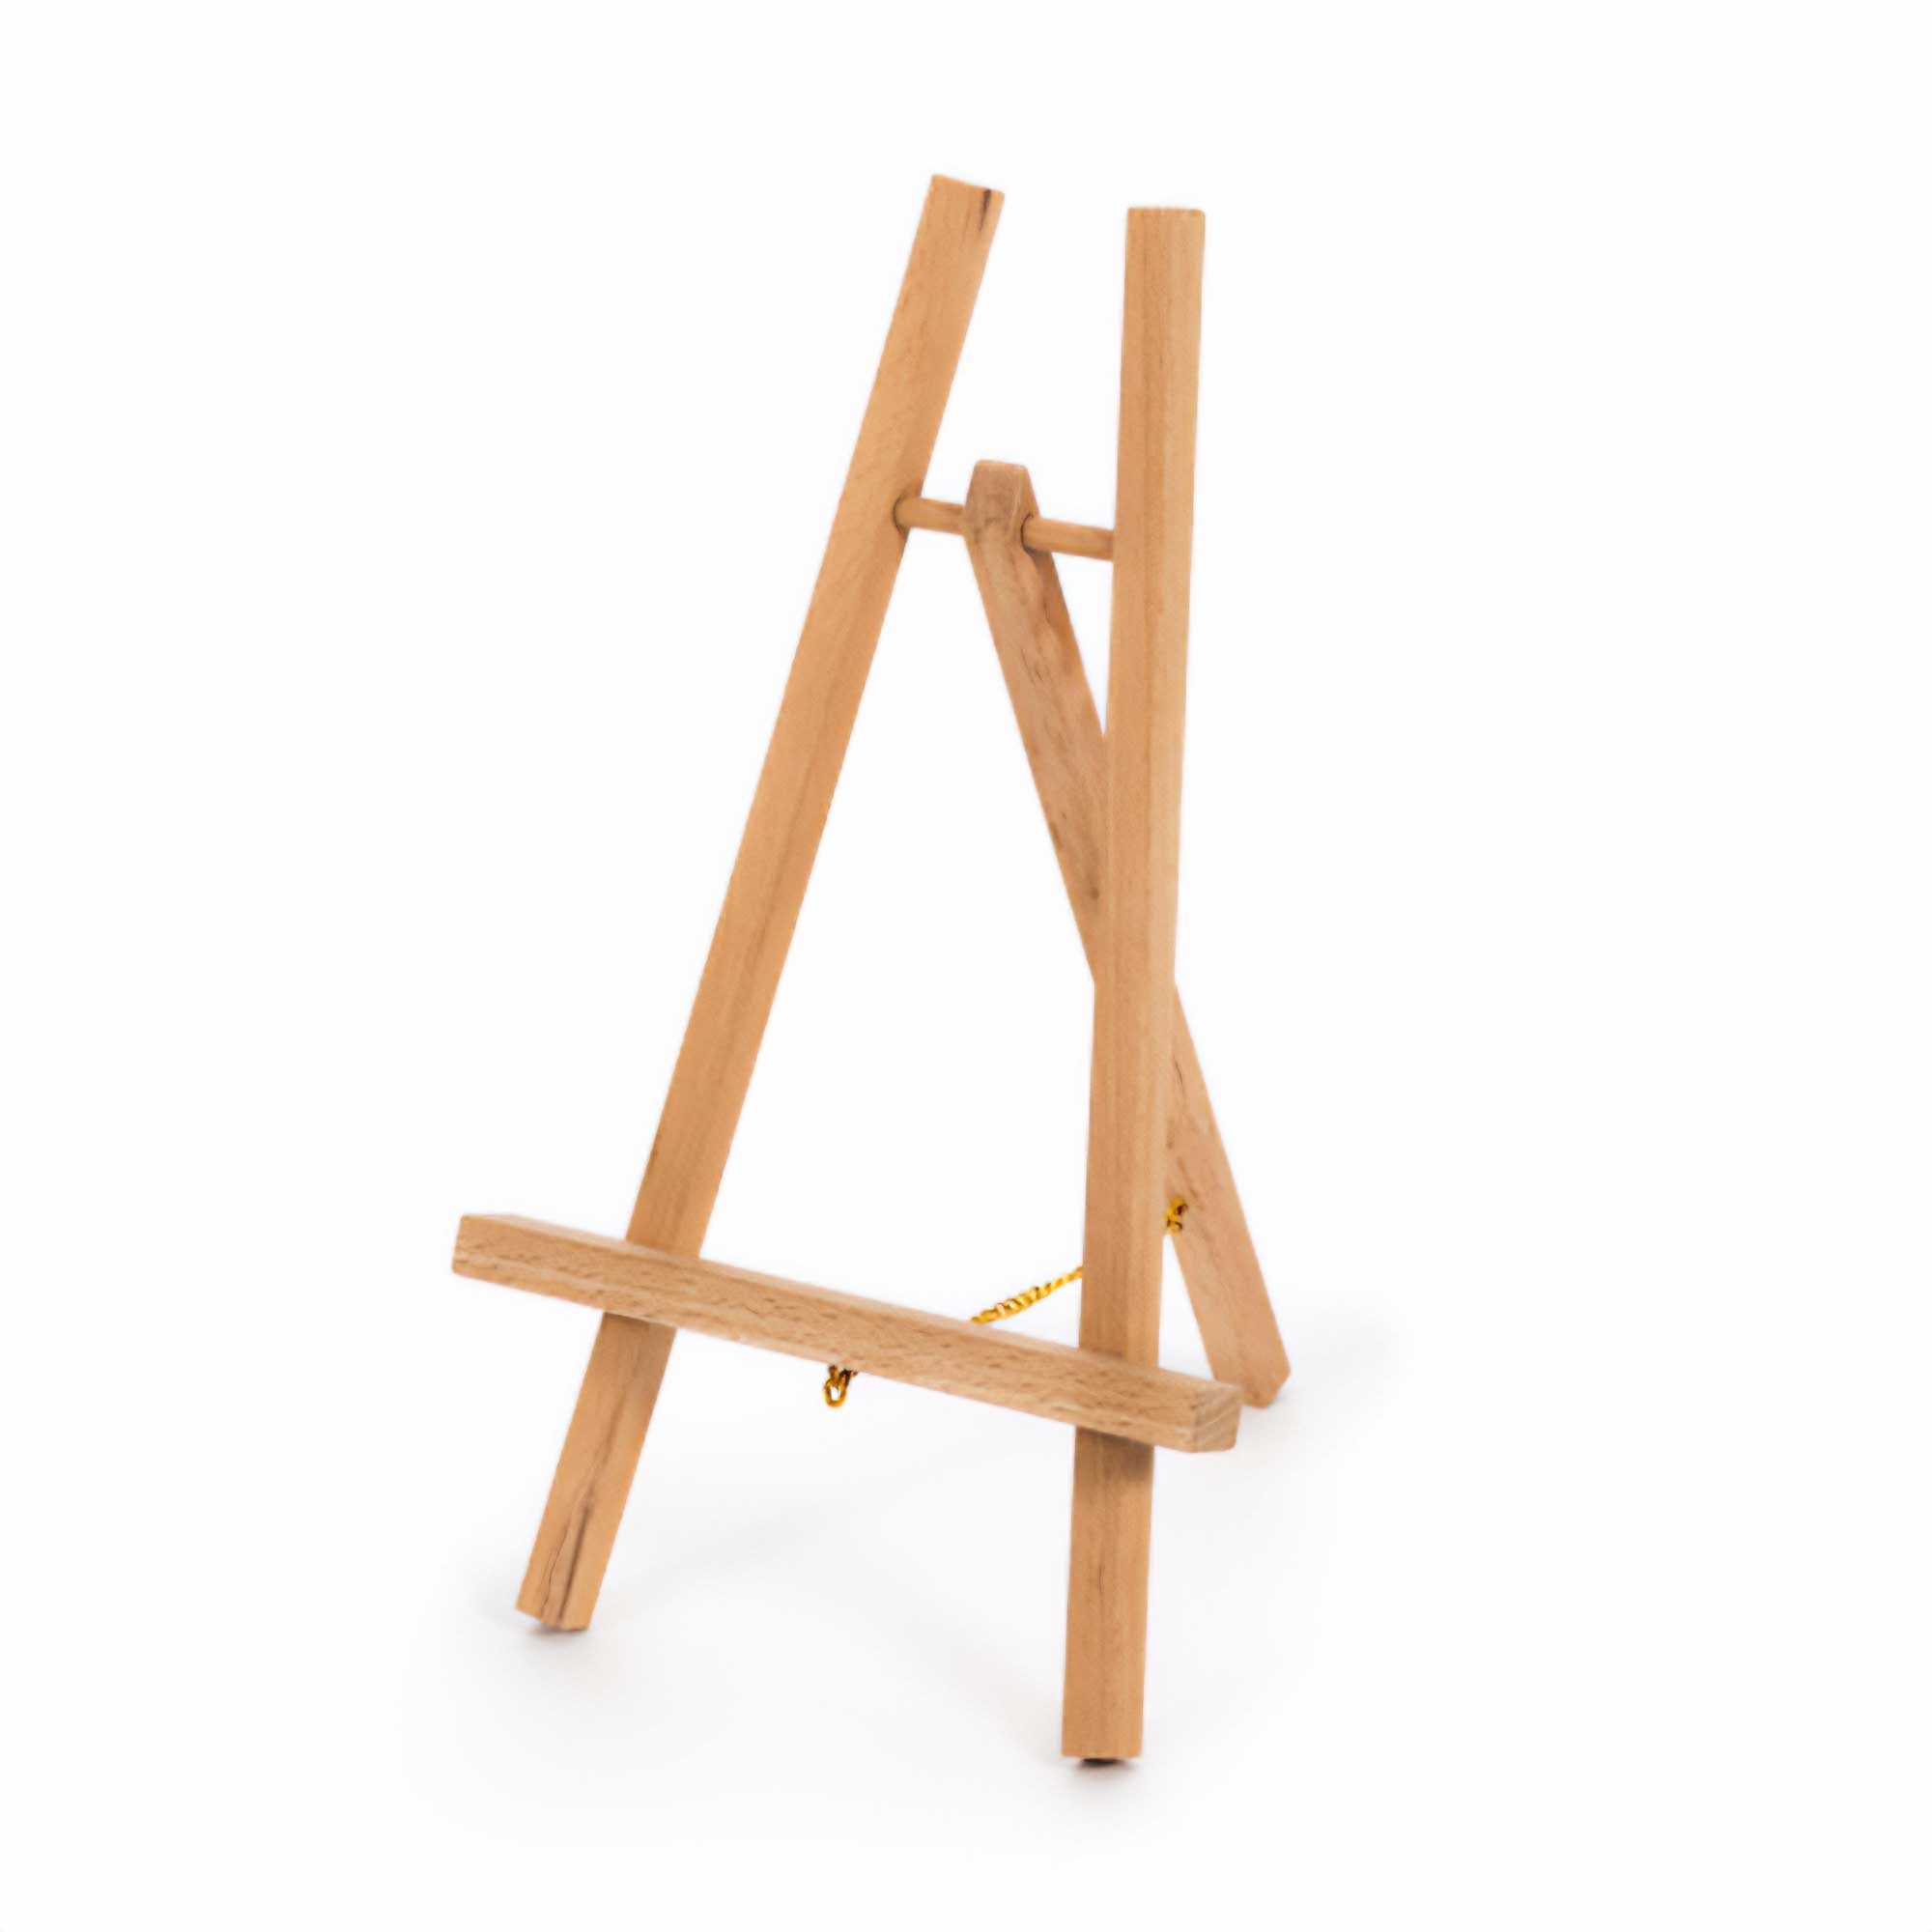 Loxley Cheshire Display Easel